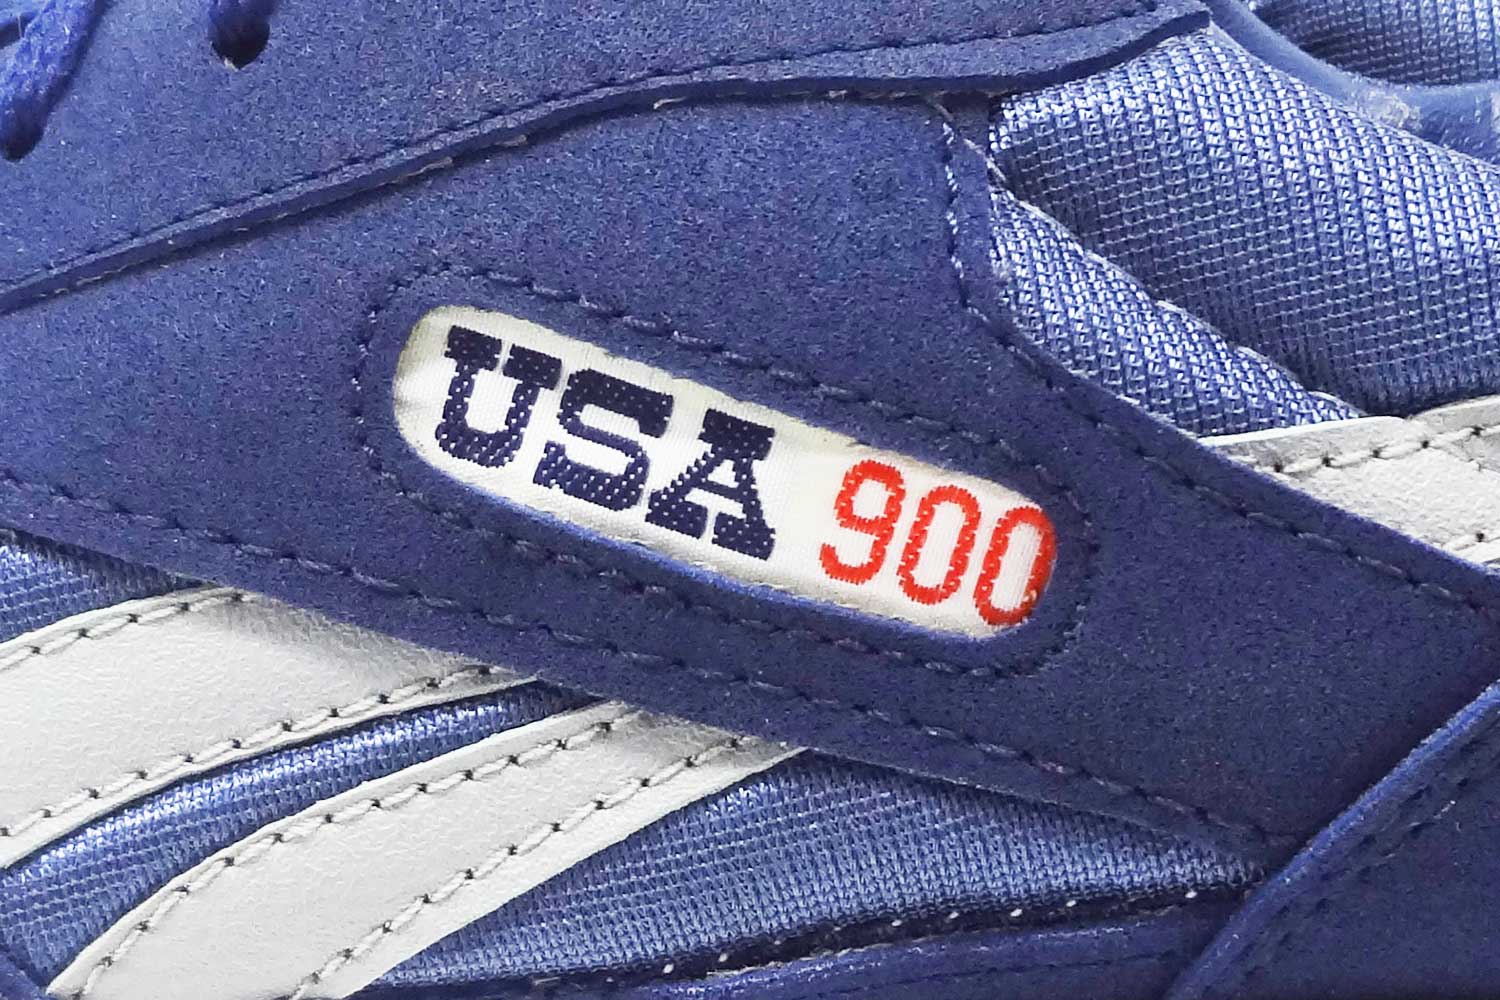 80s vintage USA 900 sneakers logo detail @ The Deffest